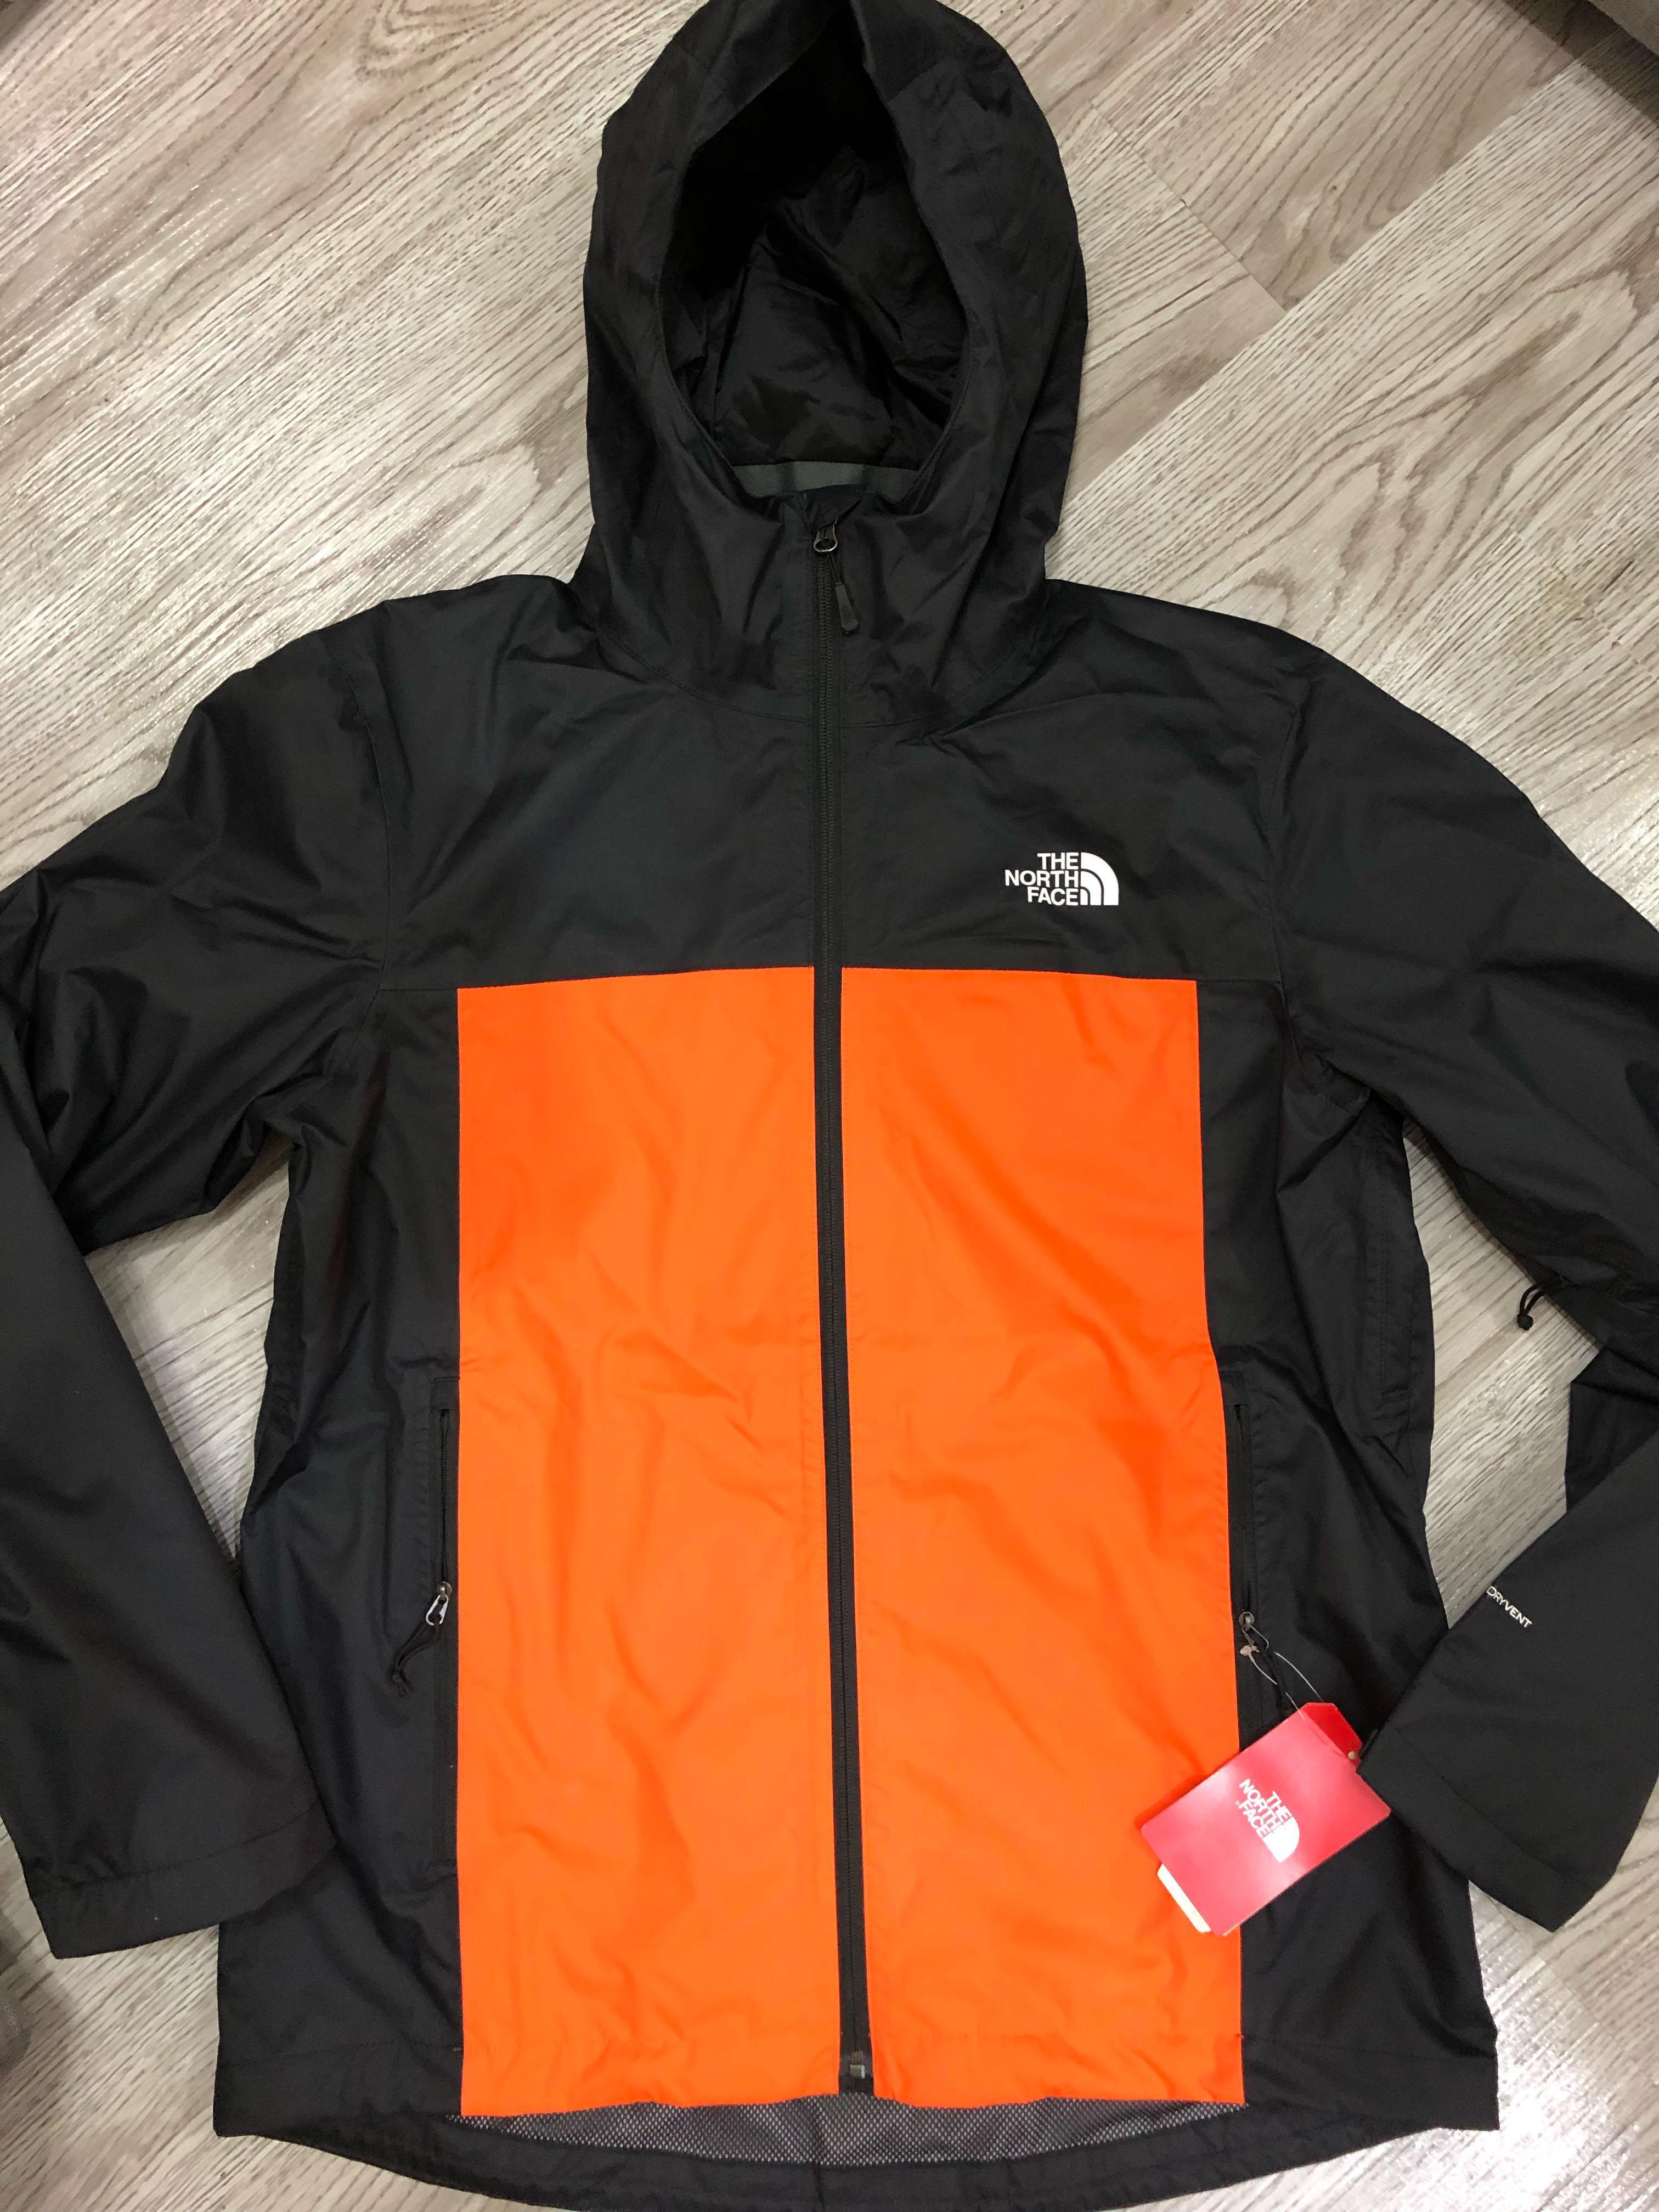 the north face fornet pant